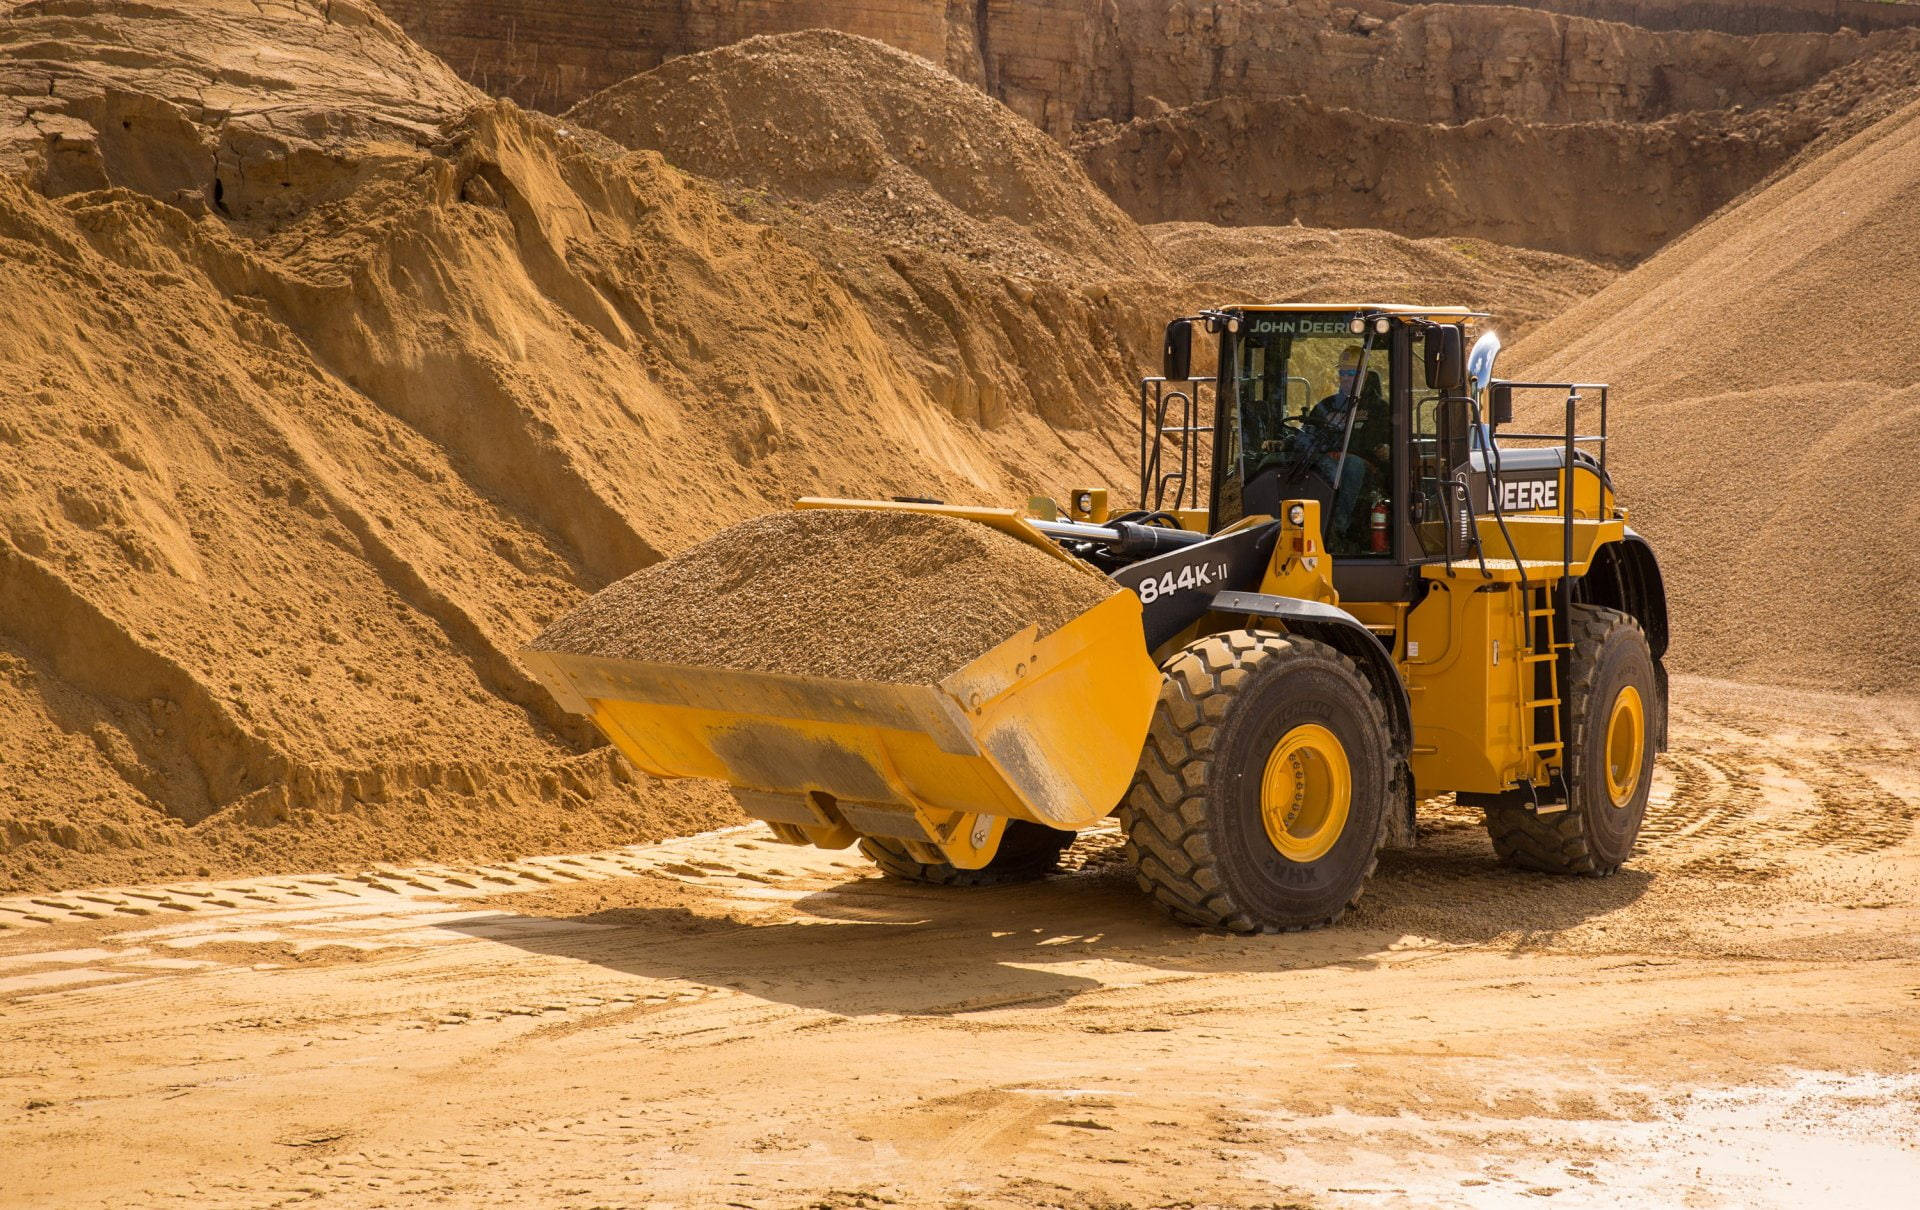 A Powerful John Deere Wheel Loader In Action At The Construction Site.